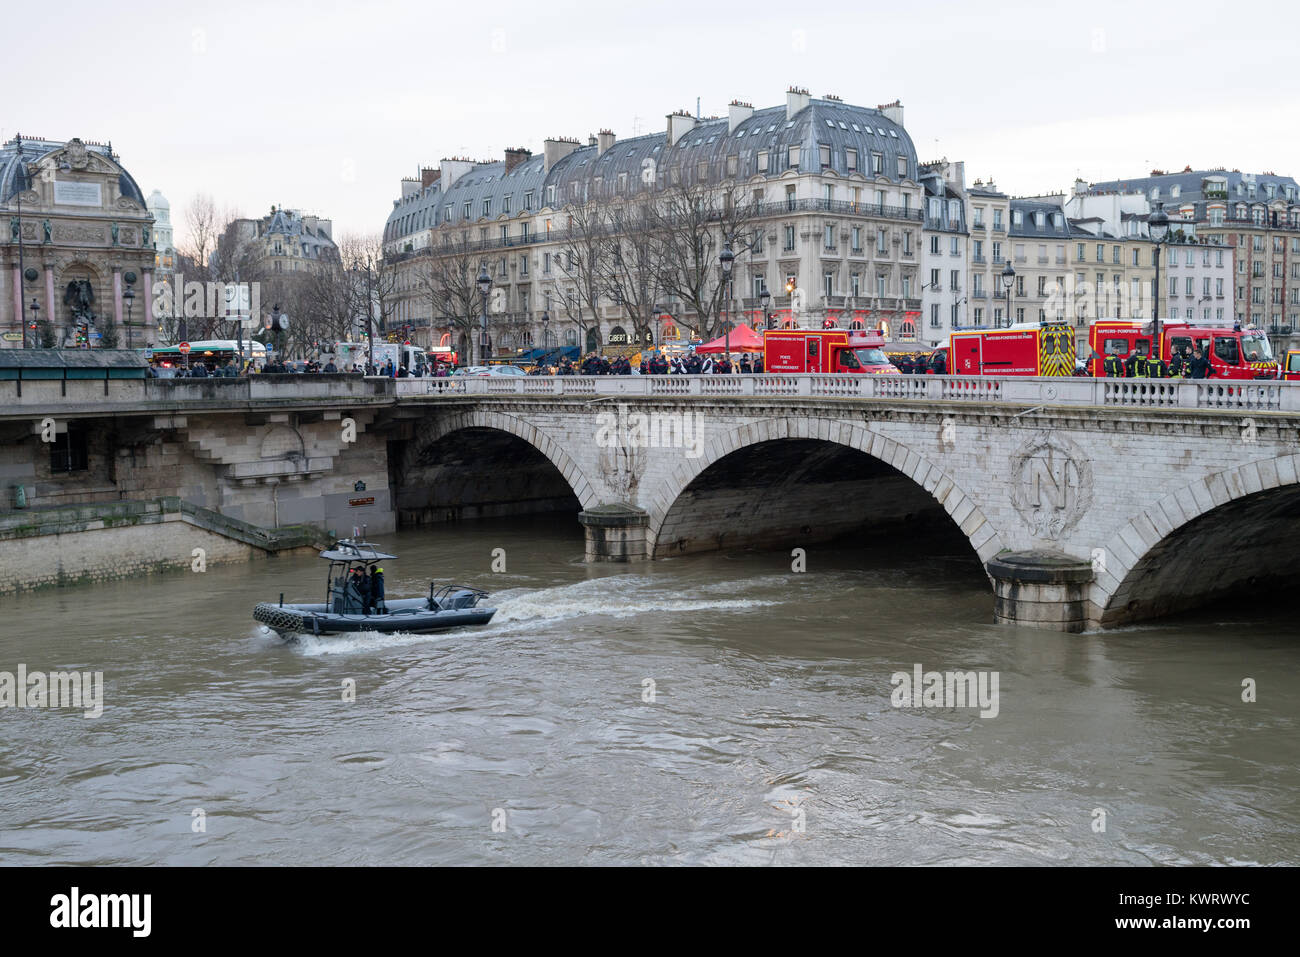 Paris, France. January 5, 2018. Paris, Notre Dame. A boat of the river brigade arrives to the place where emergency services coordinate an ongoing search operation of a member of the river police brigade that went missing during a diving exercise in the Seine, during the afternoon hours. Credit: Hector Rodriguez/Alamy Live News Stock Photo